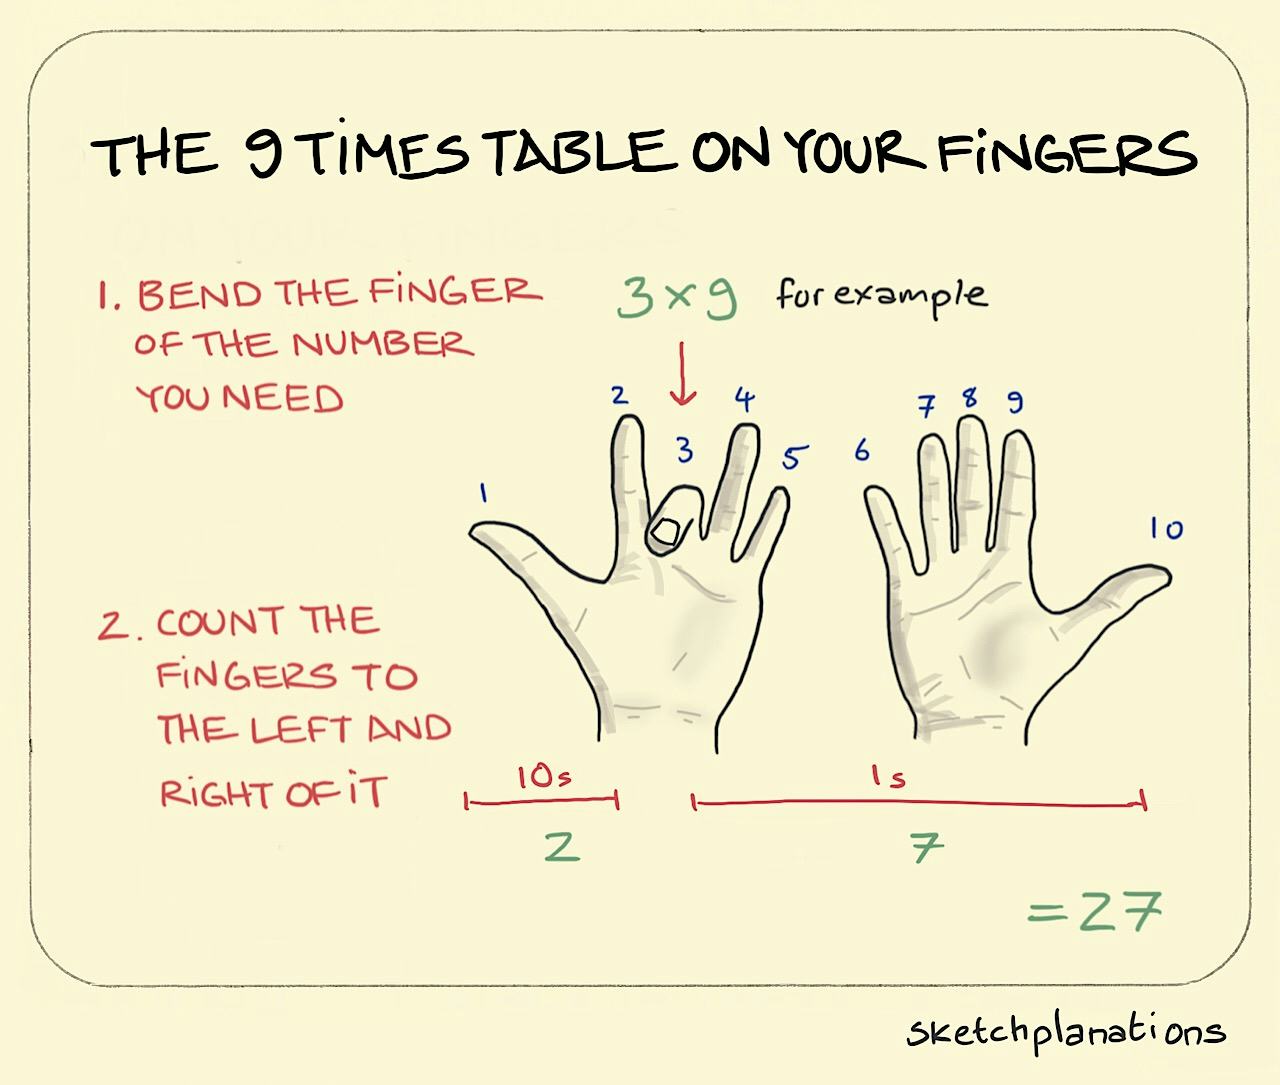 The 9 times table on your fingers - Sketchplanations